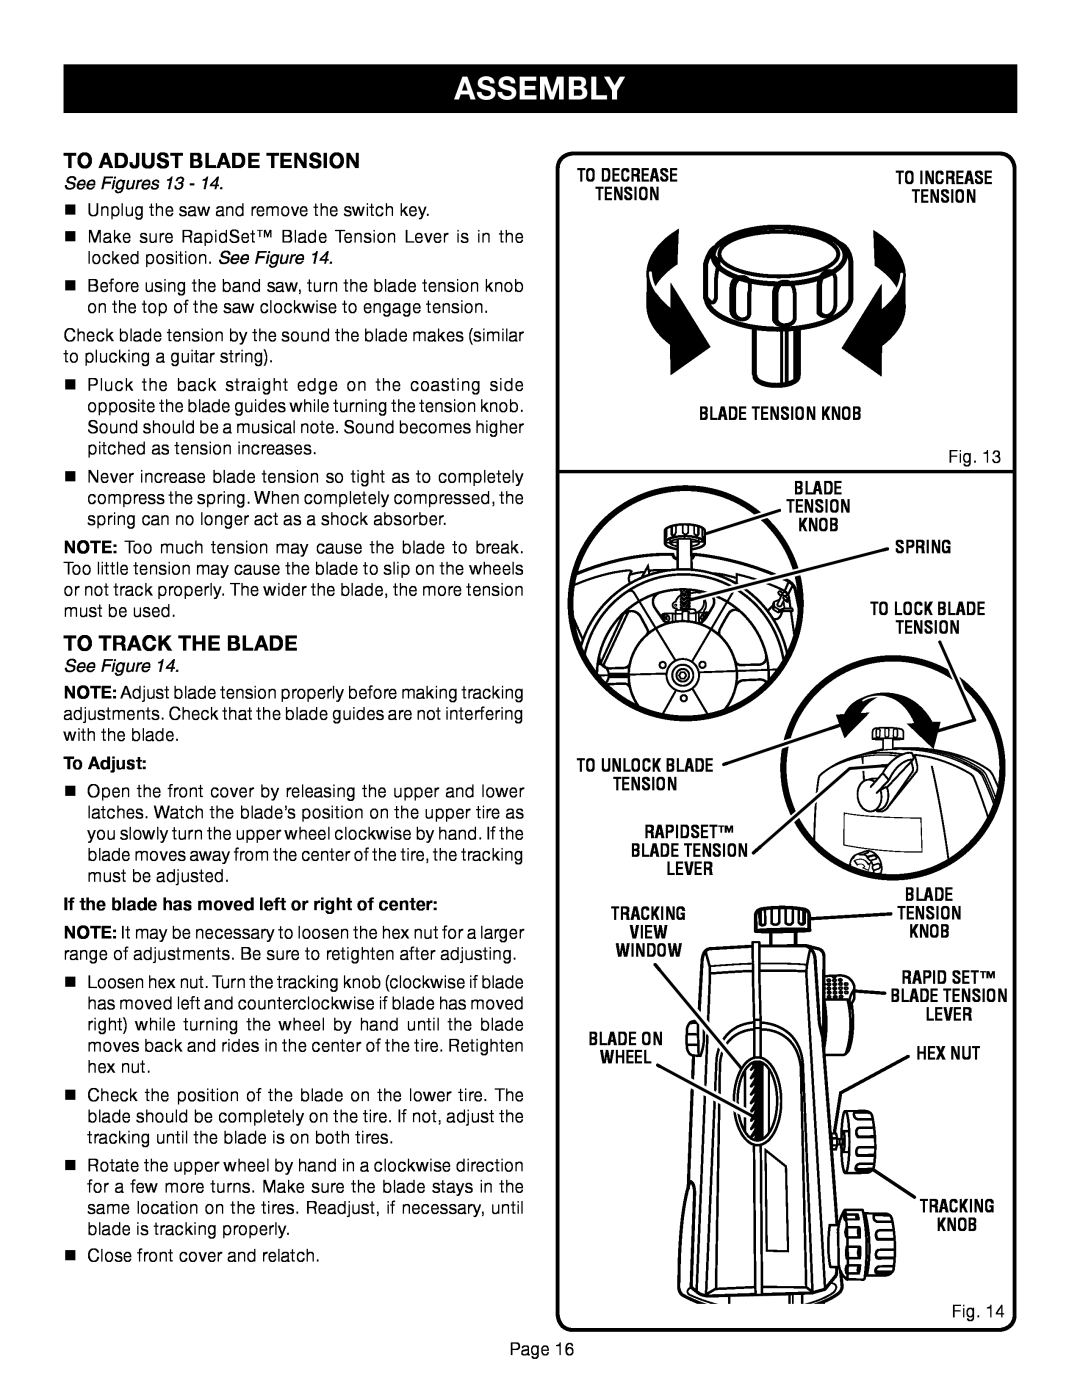 Ryobi BS1001SV manual Assembly, See Figures 13, Blade Tension Knob Spring To Lock Blade Tension, To Adjust 